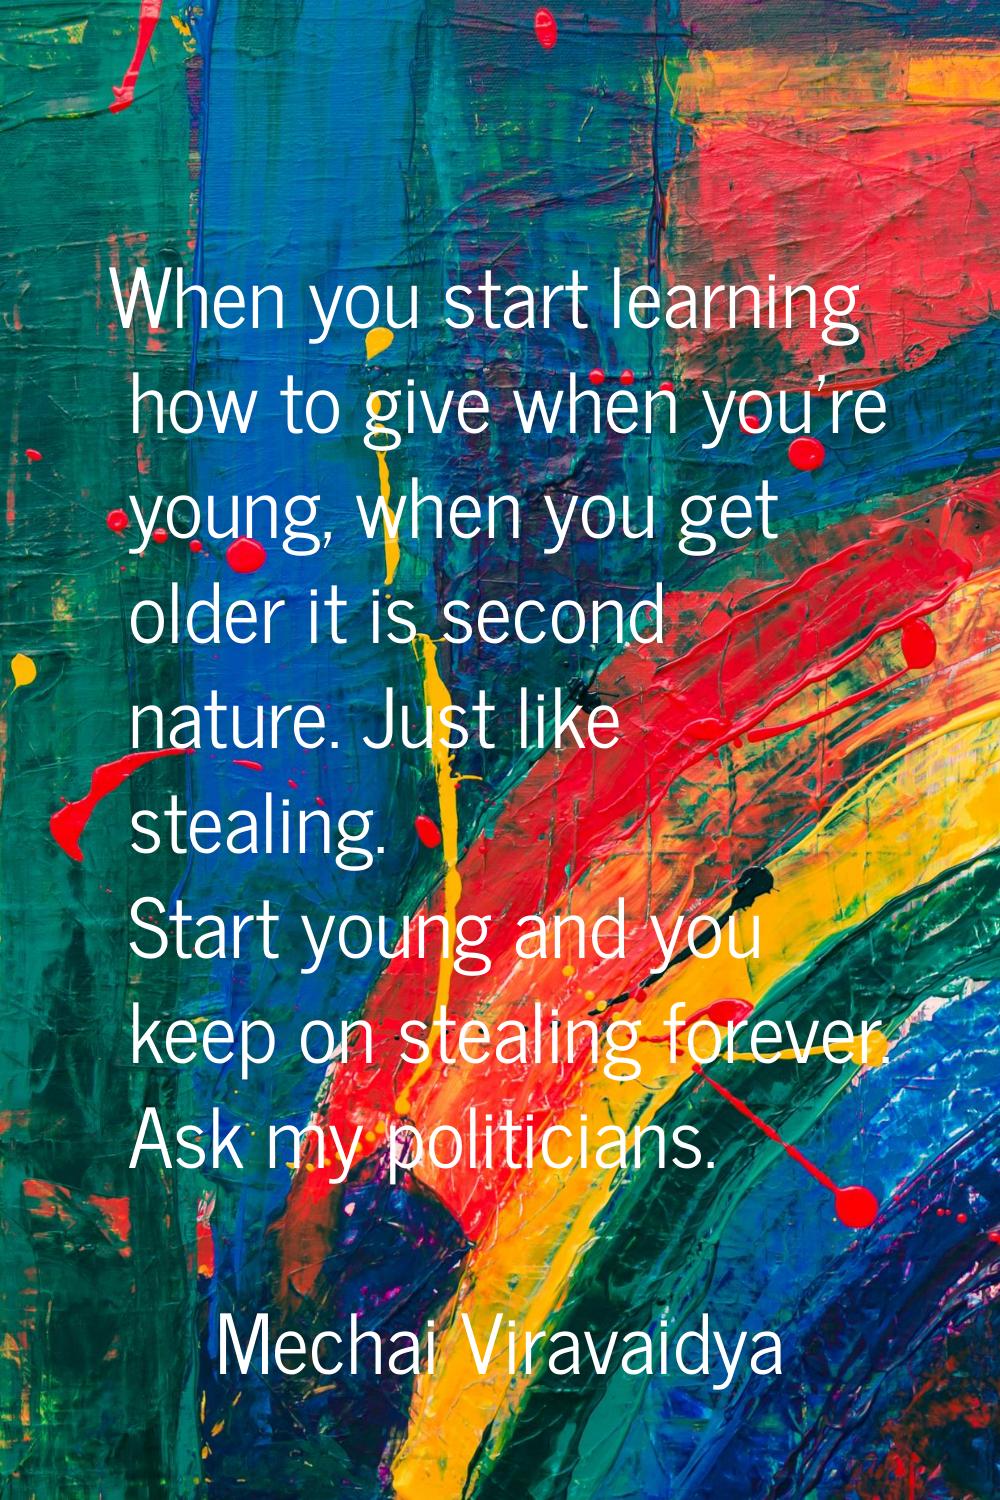 When you start learning how to give when you're young, when you get older it is second nature. Just